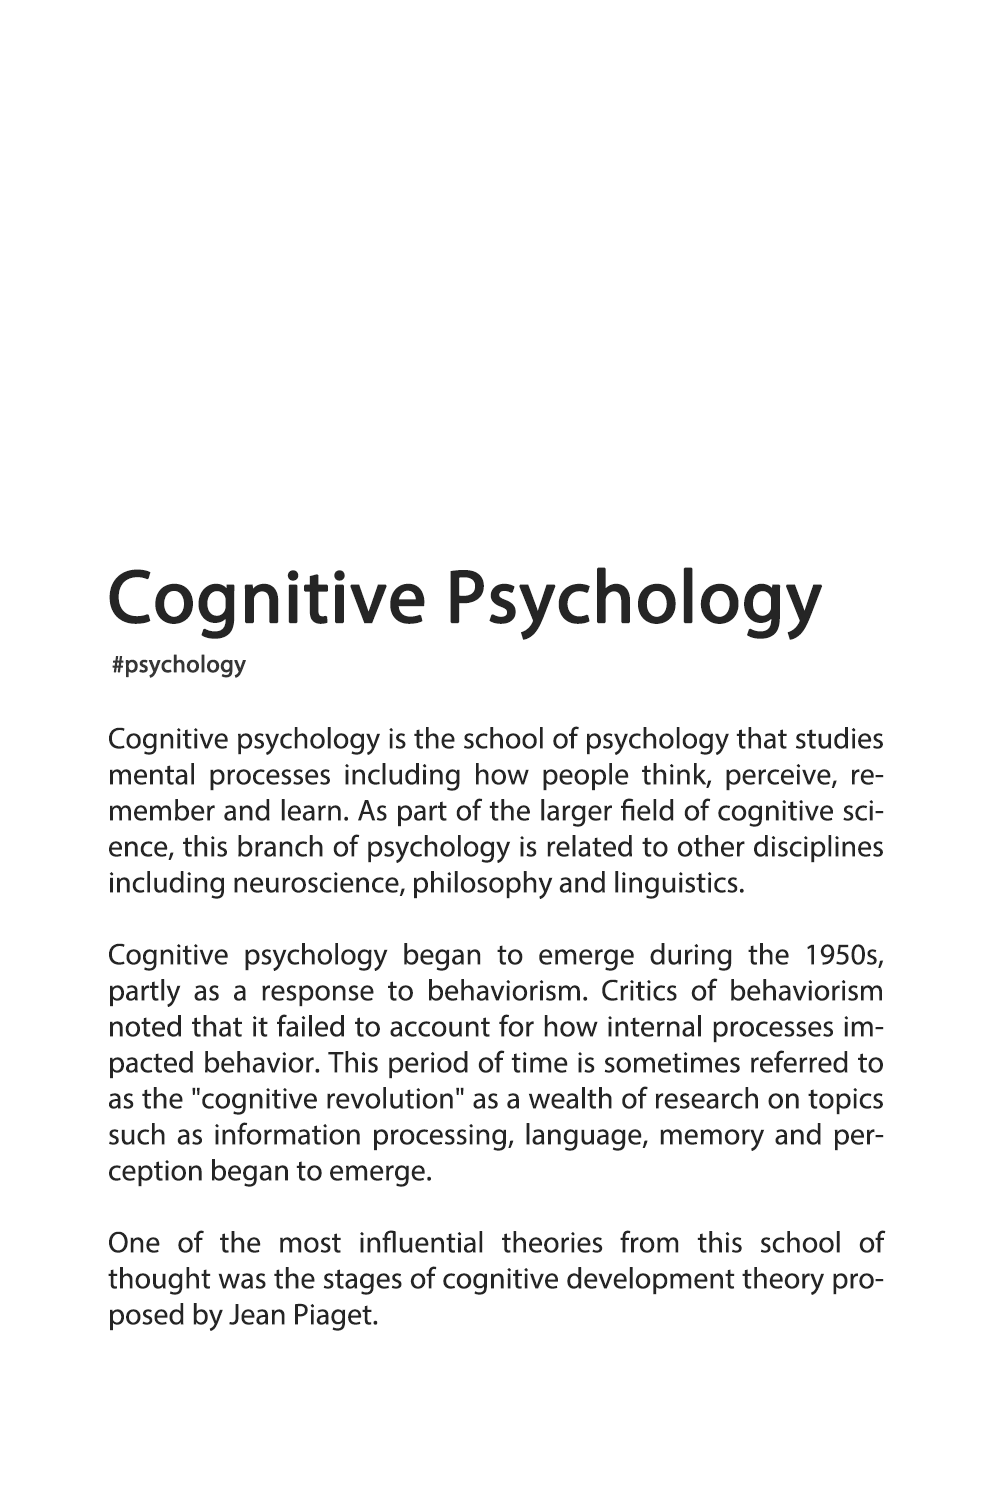 Major Psychological Schools of Thought